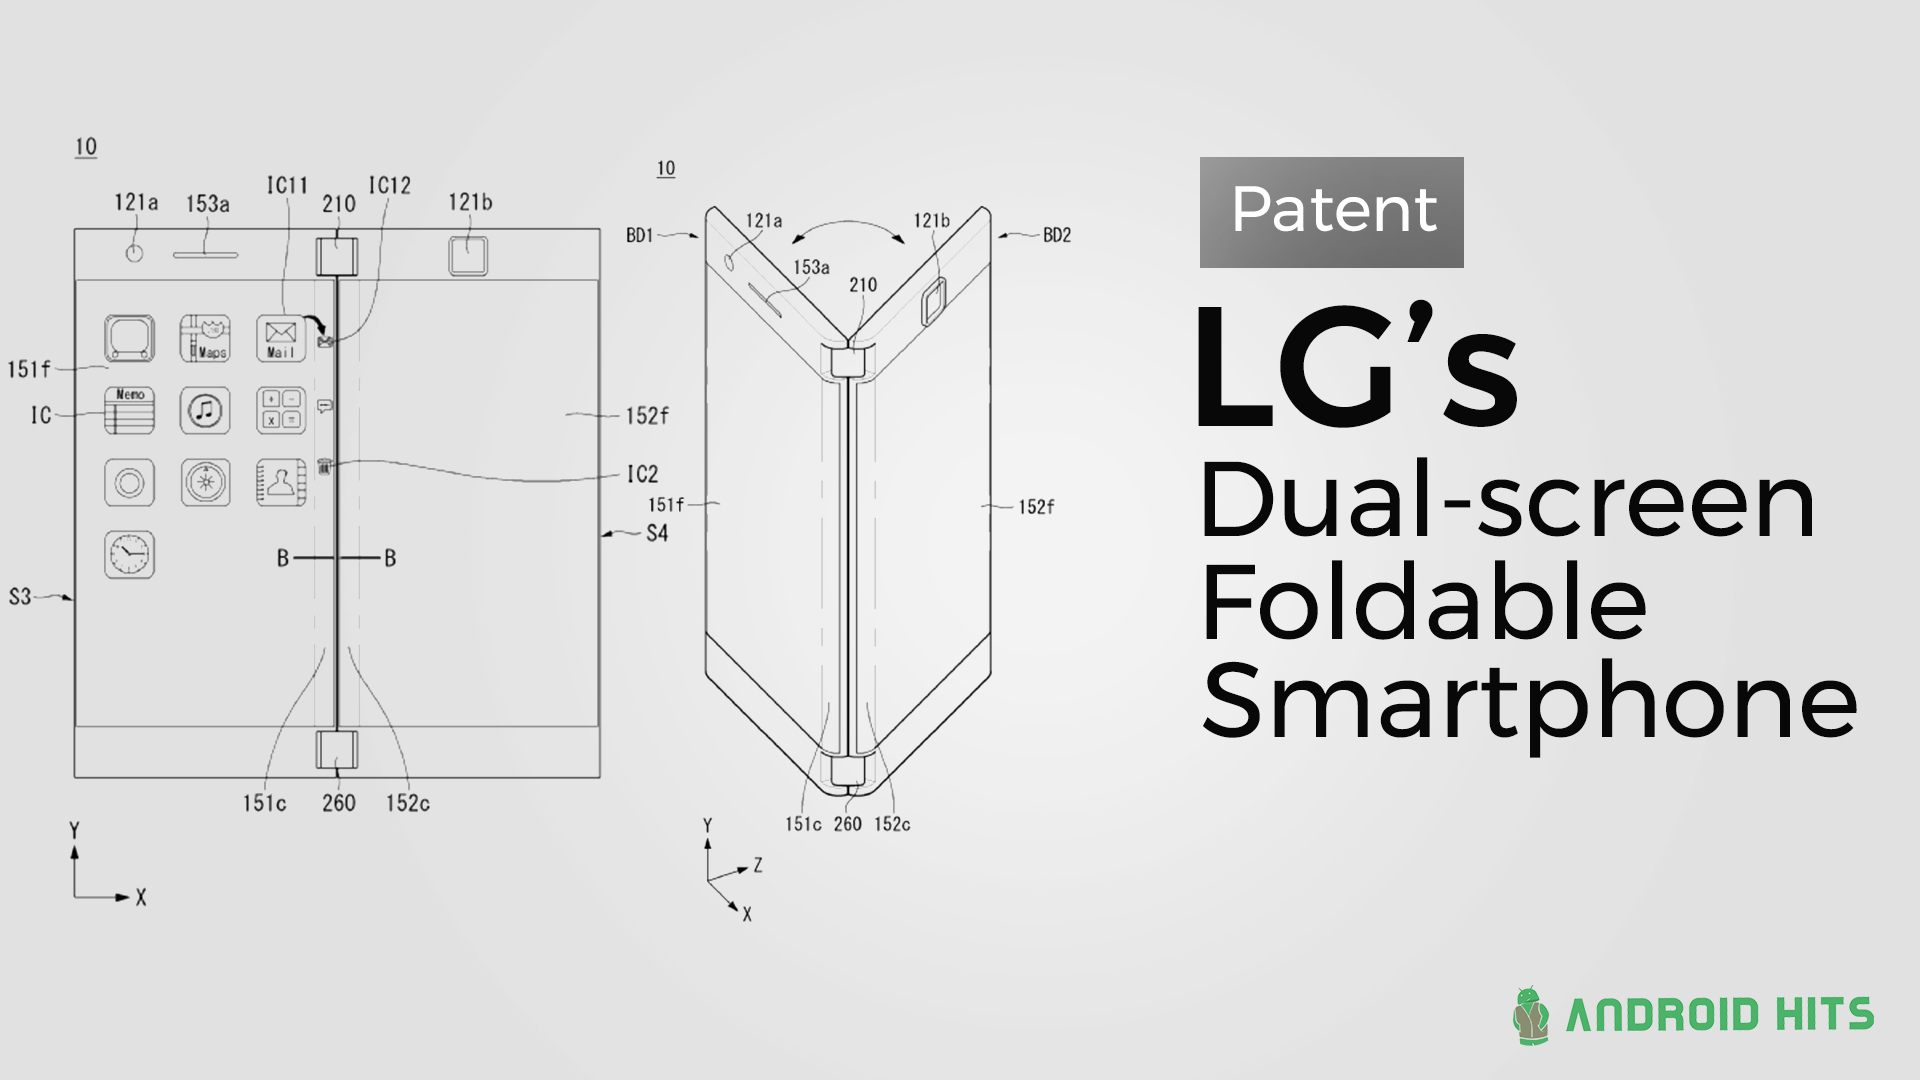 Patent shows LG's dual-screen foldable smartphone 2